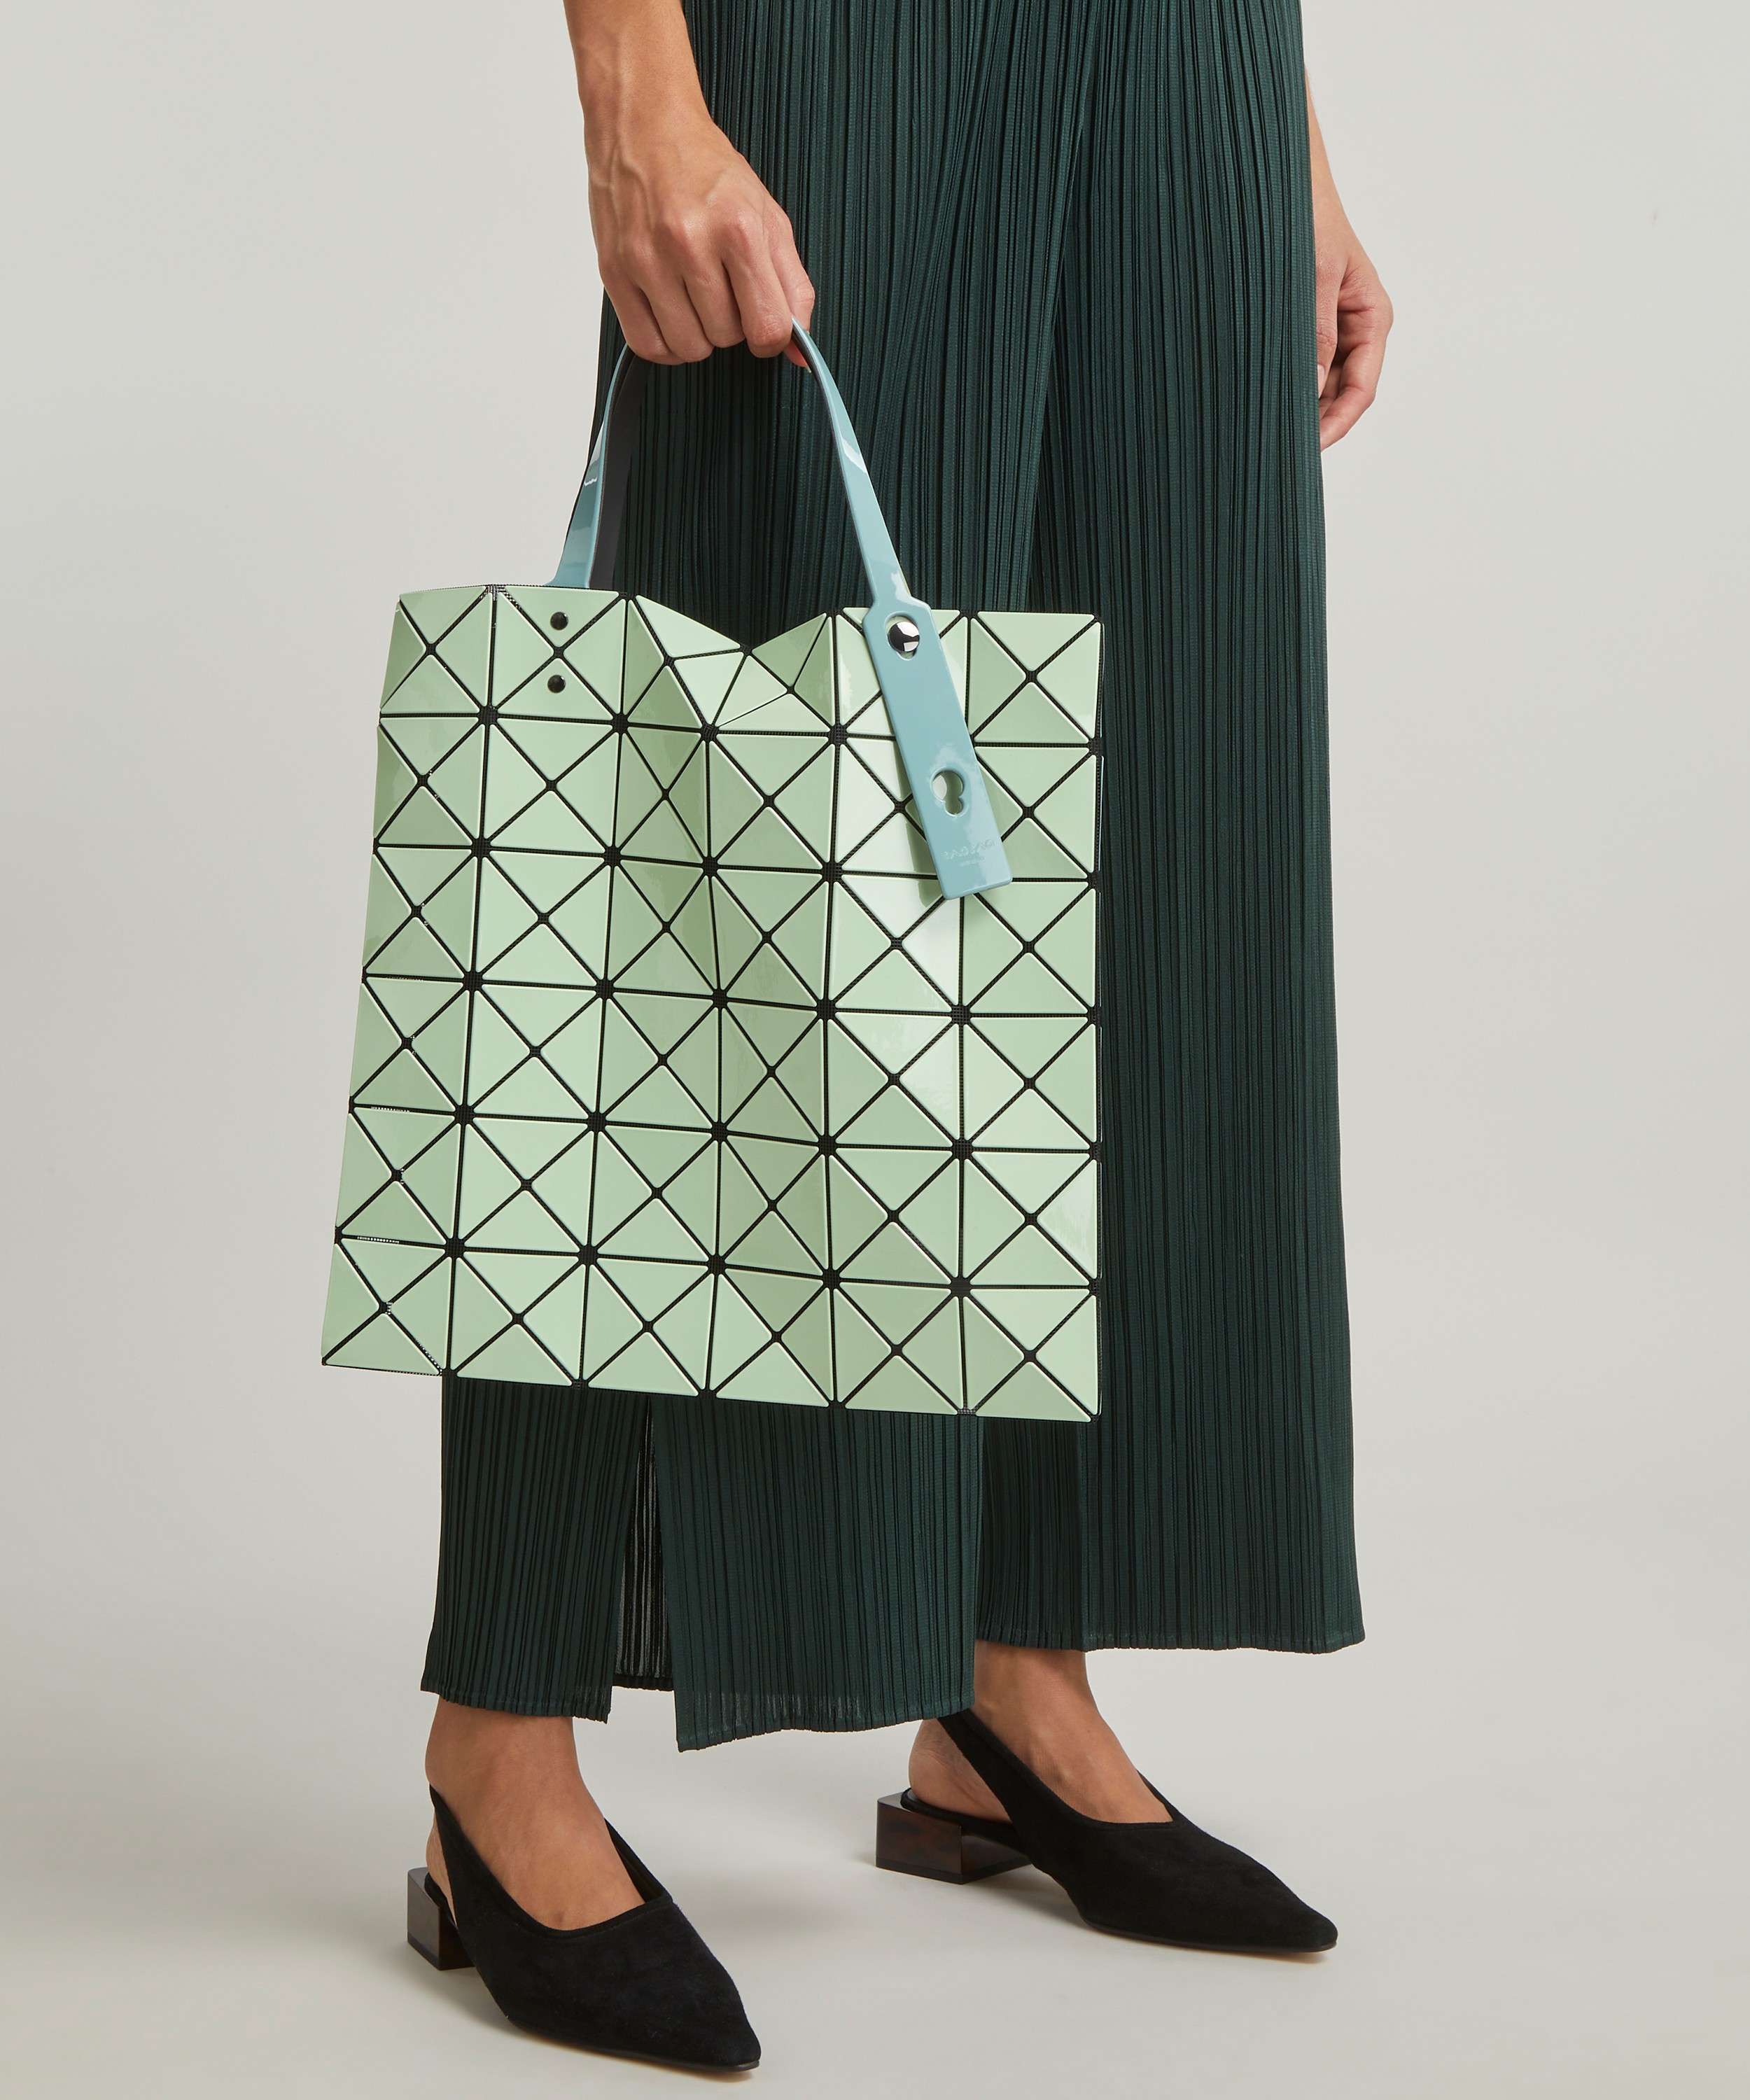 Outfit ideas - How to wear BAO BAO ISSEY MIYAKE Lucent Frost tote - WEAR